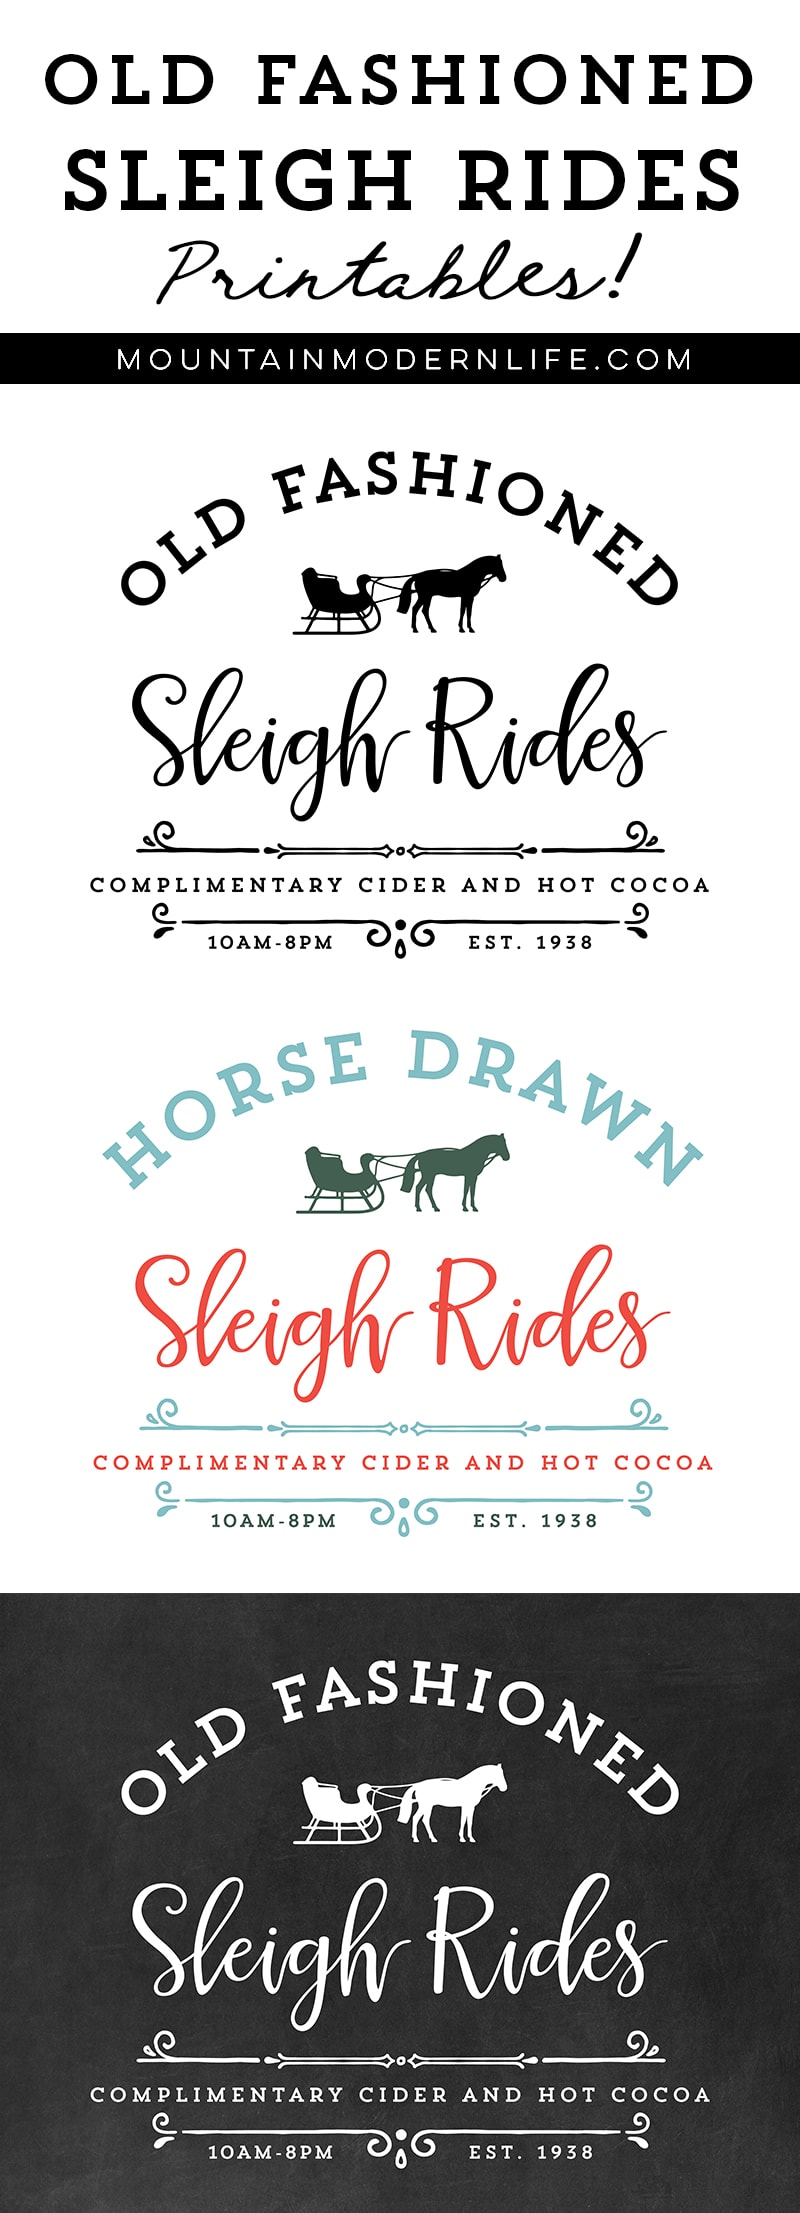 Old Fashioned Sleigh Rides Printables! | MountainModernLife.com